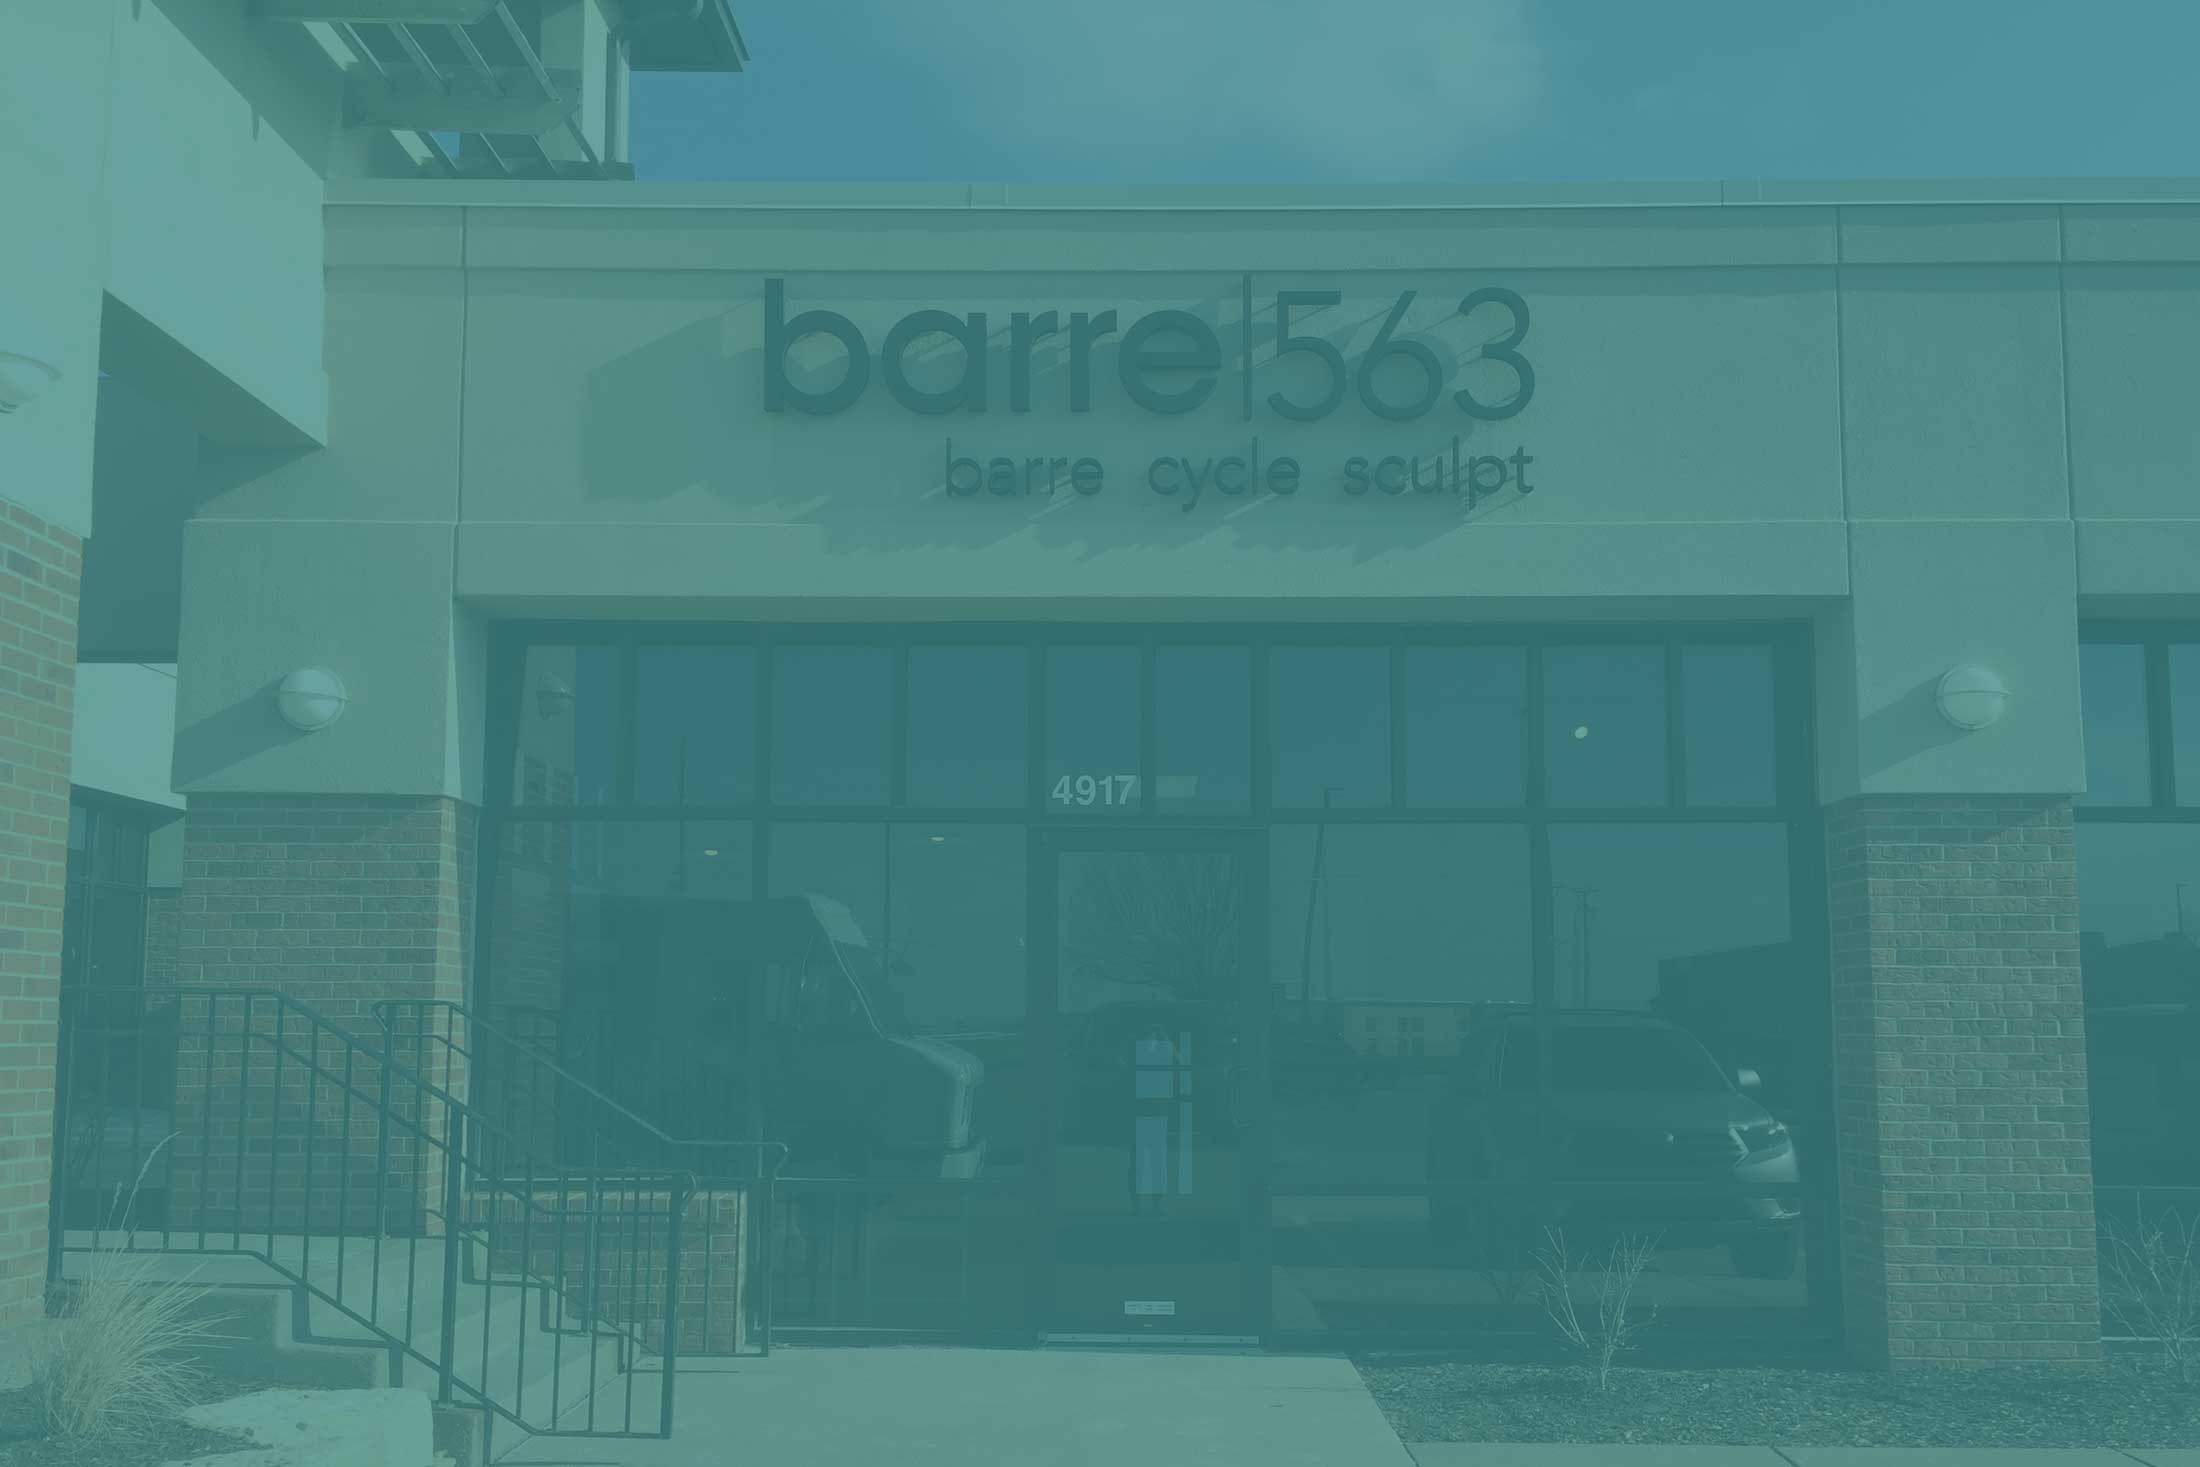 About Barre 563